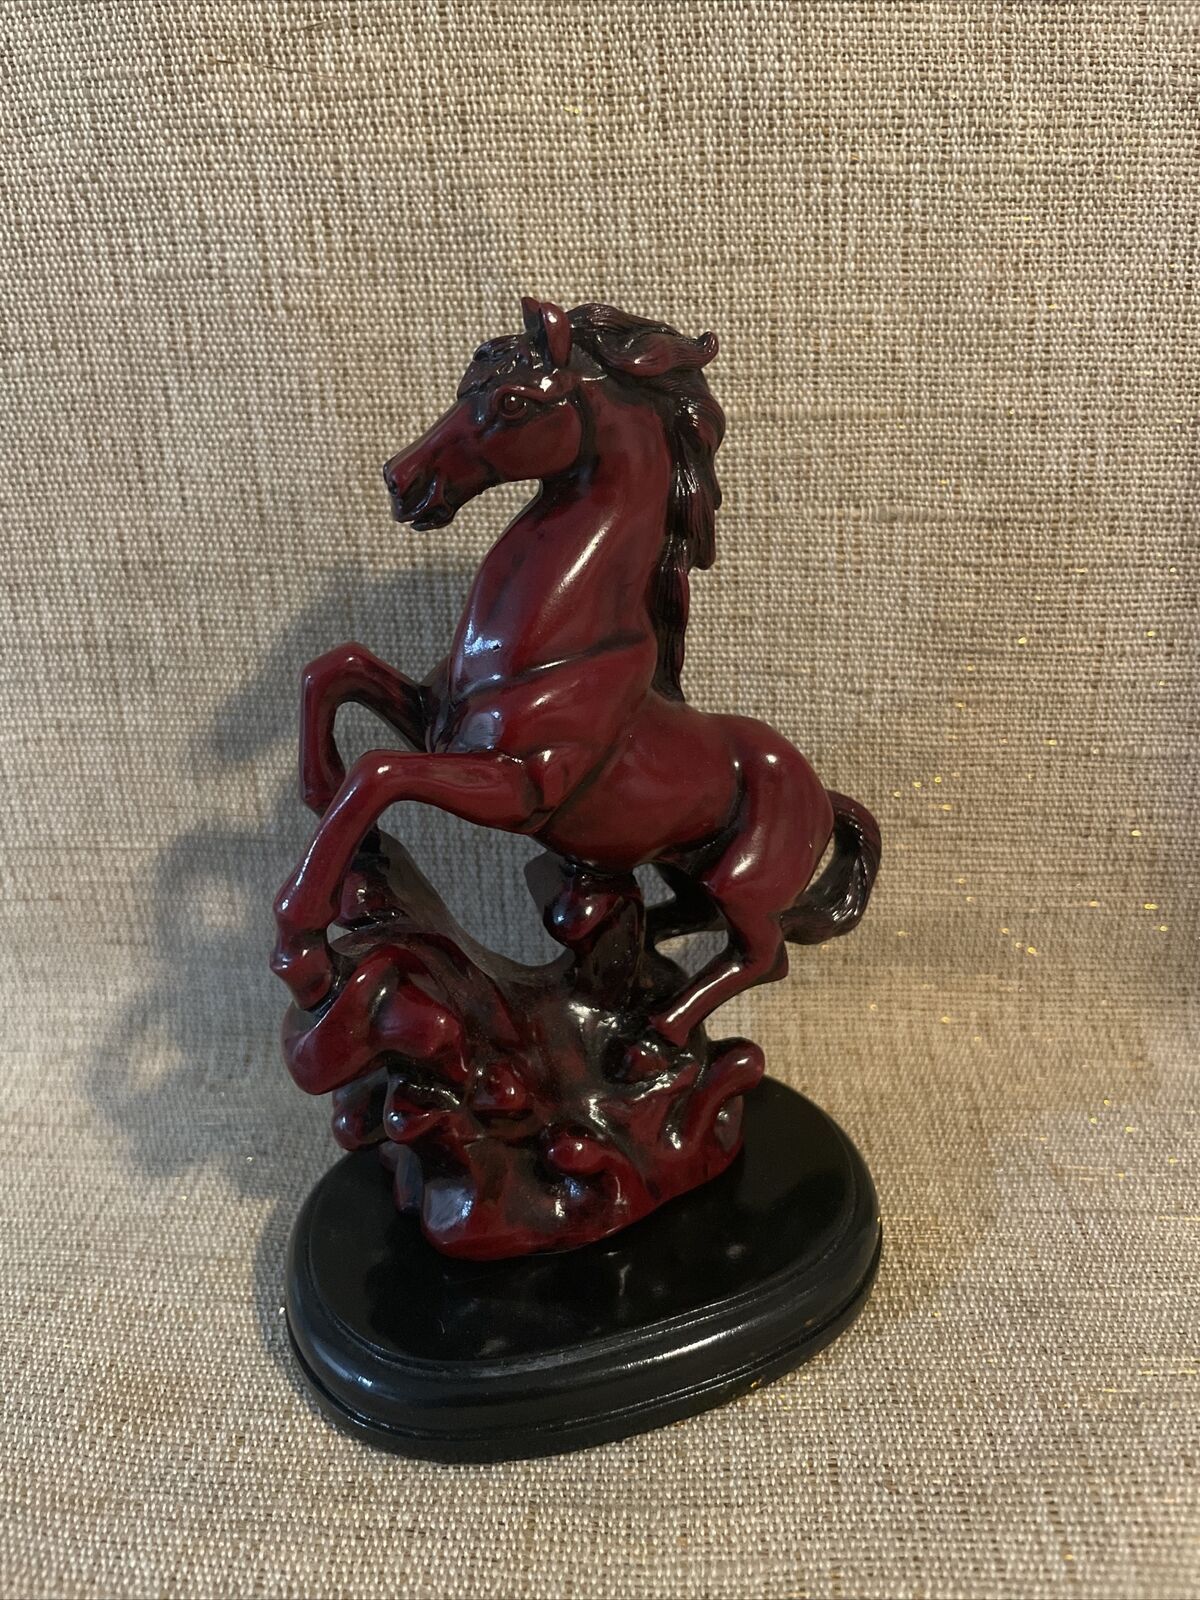 GORGEOUS STALLION HORSE  FIGURINE MADE OF BURGUNDY RED  HEAVY RESIN 5.5”